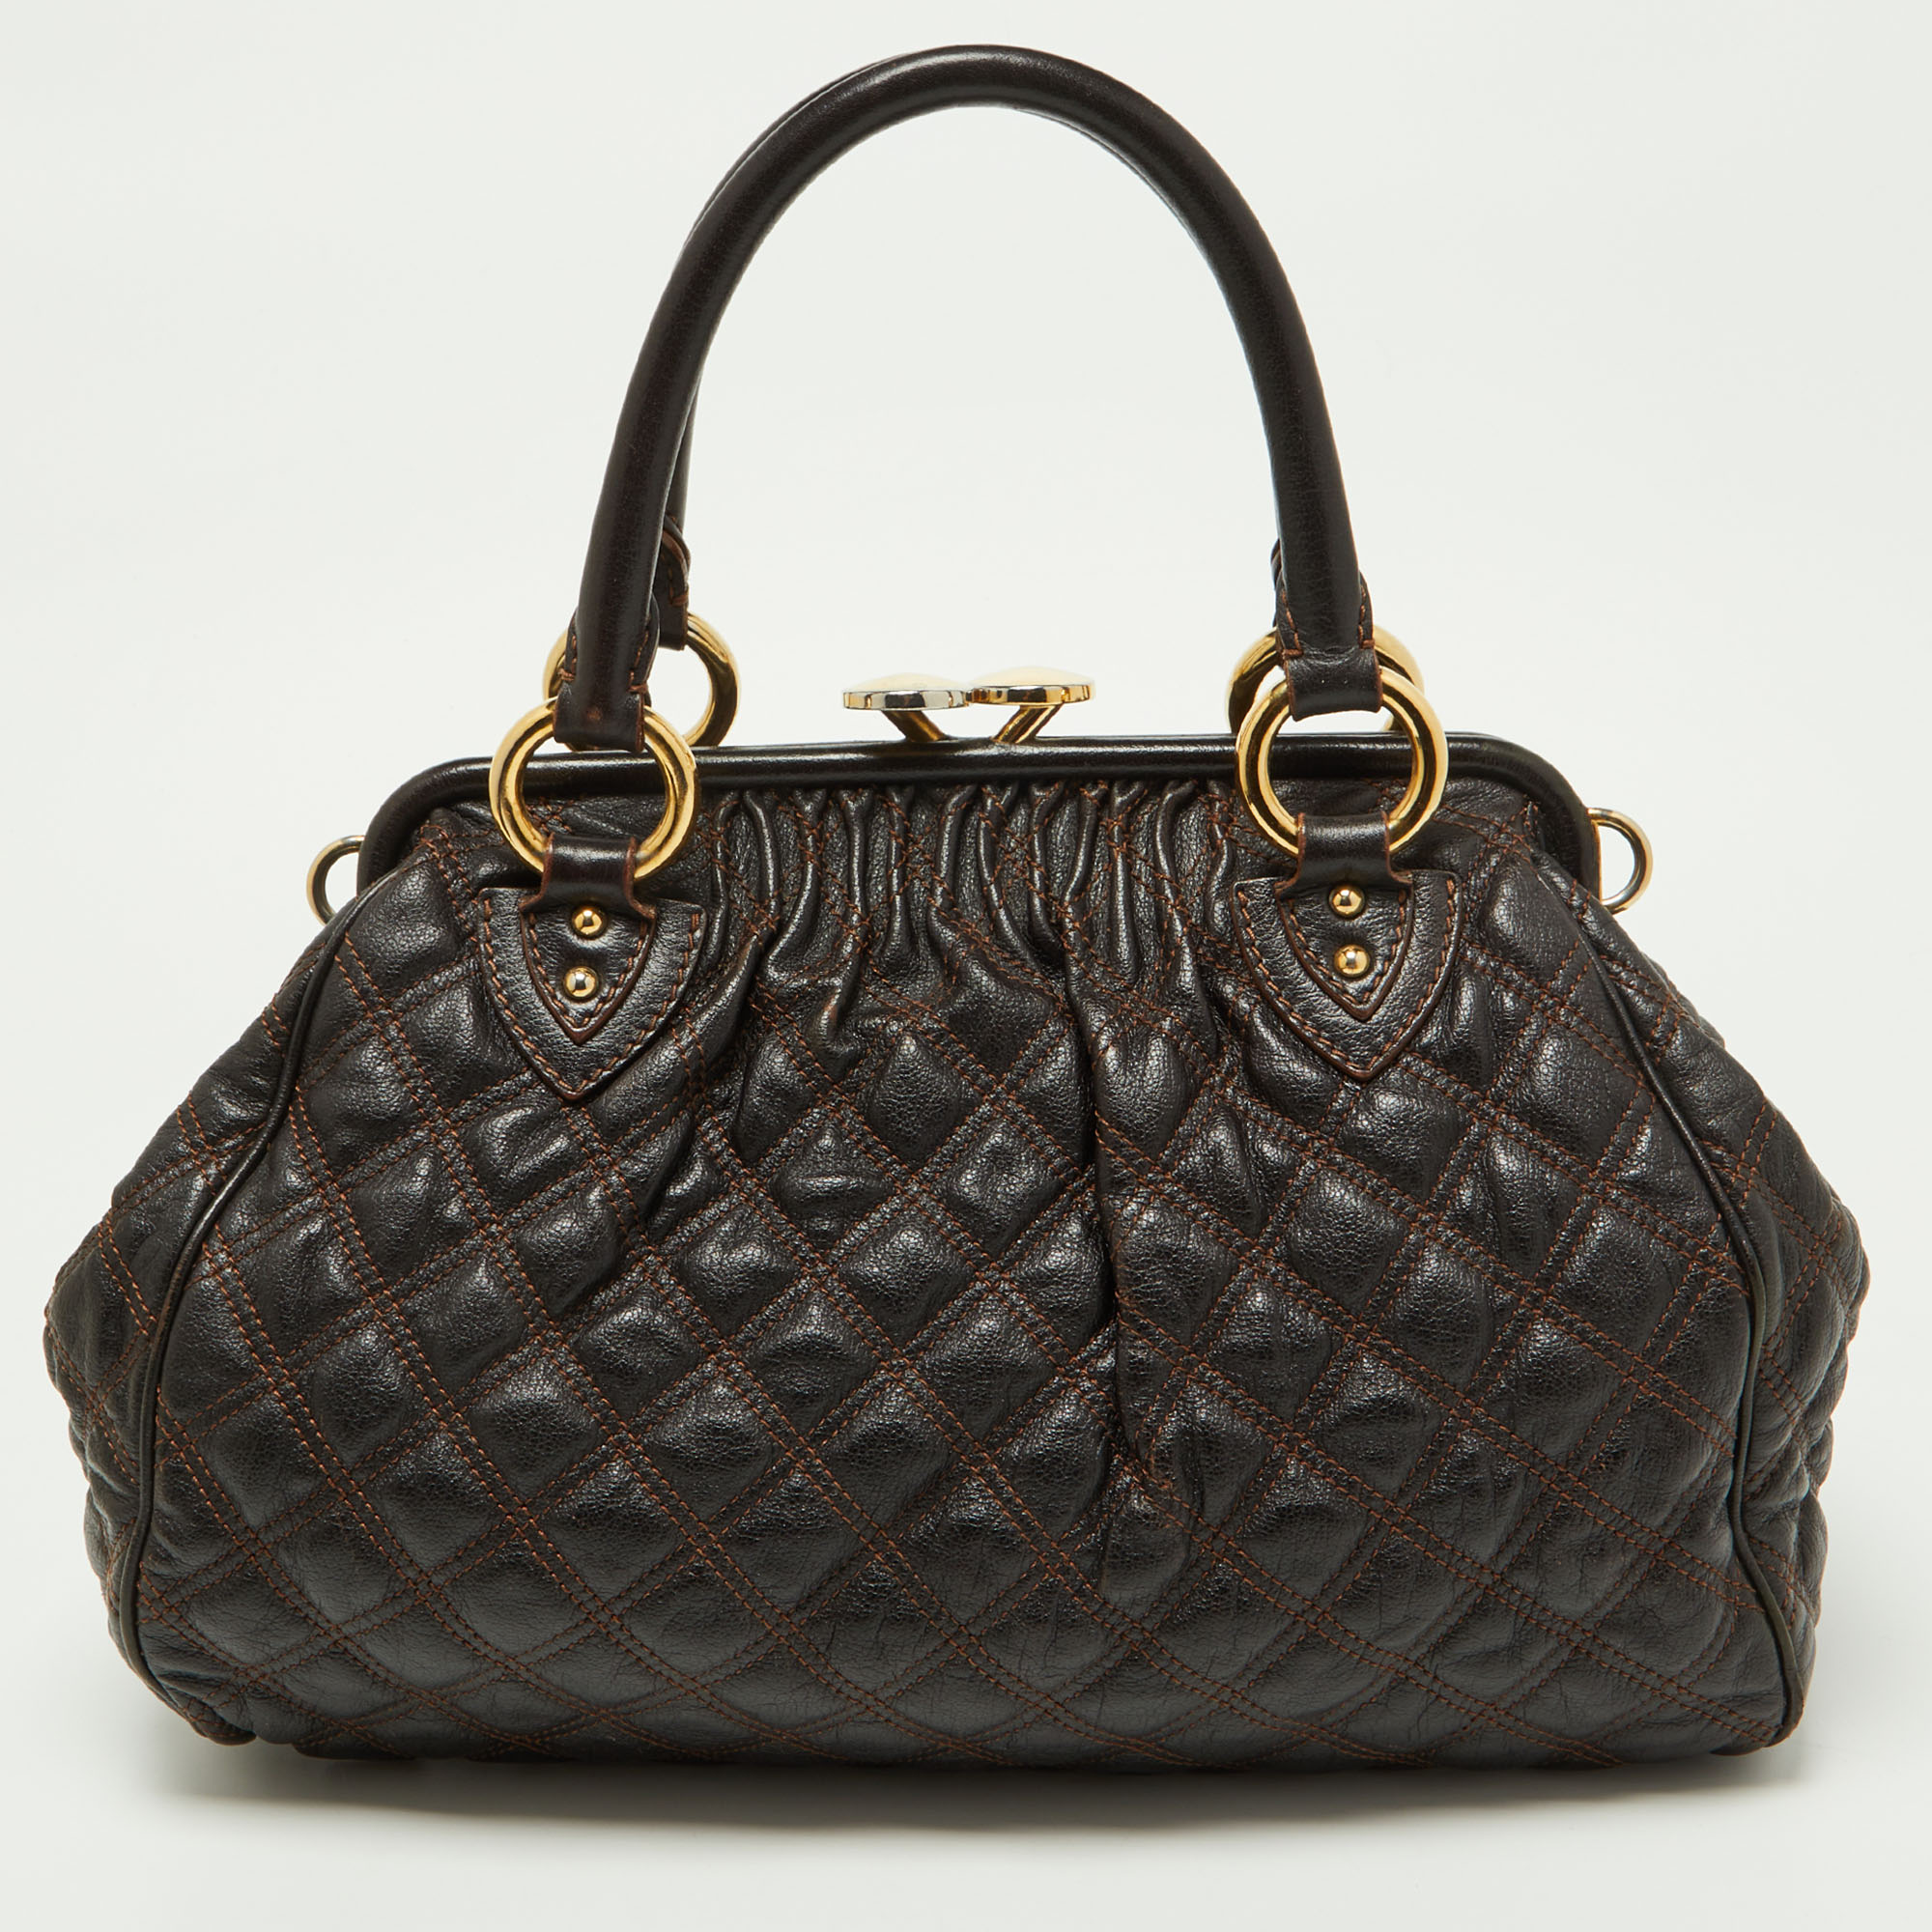 Marc Jacobs Dark Brown Quilted Leather Stam Bag